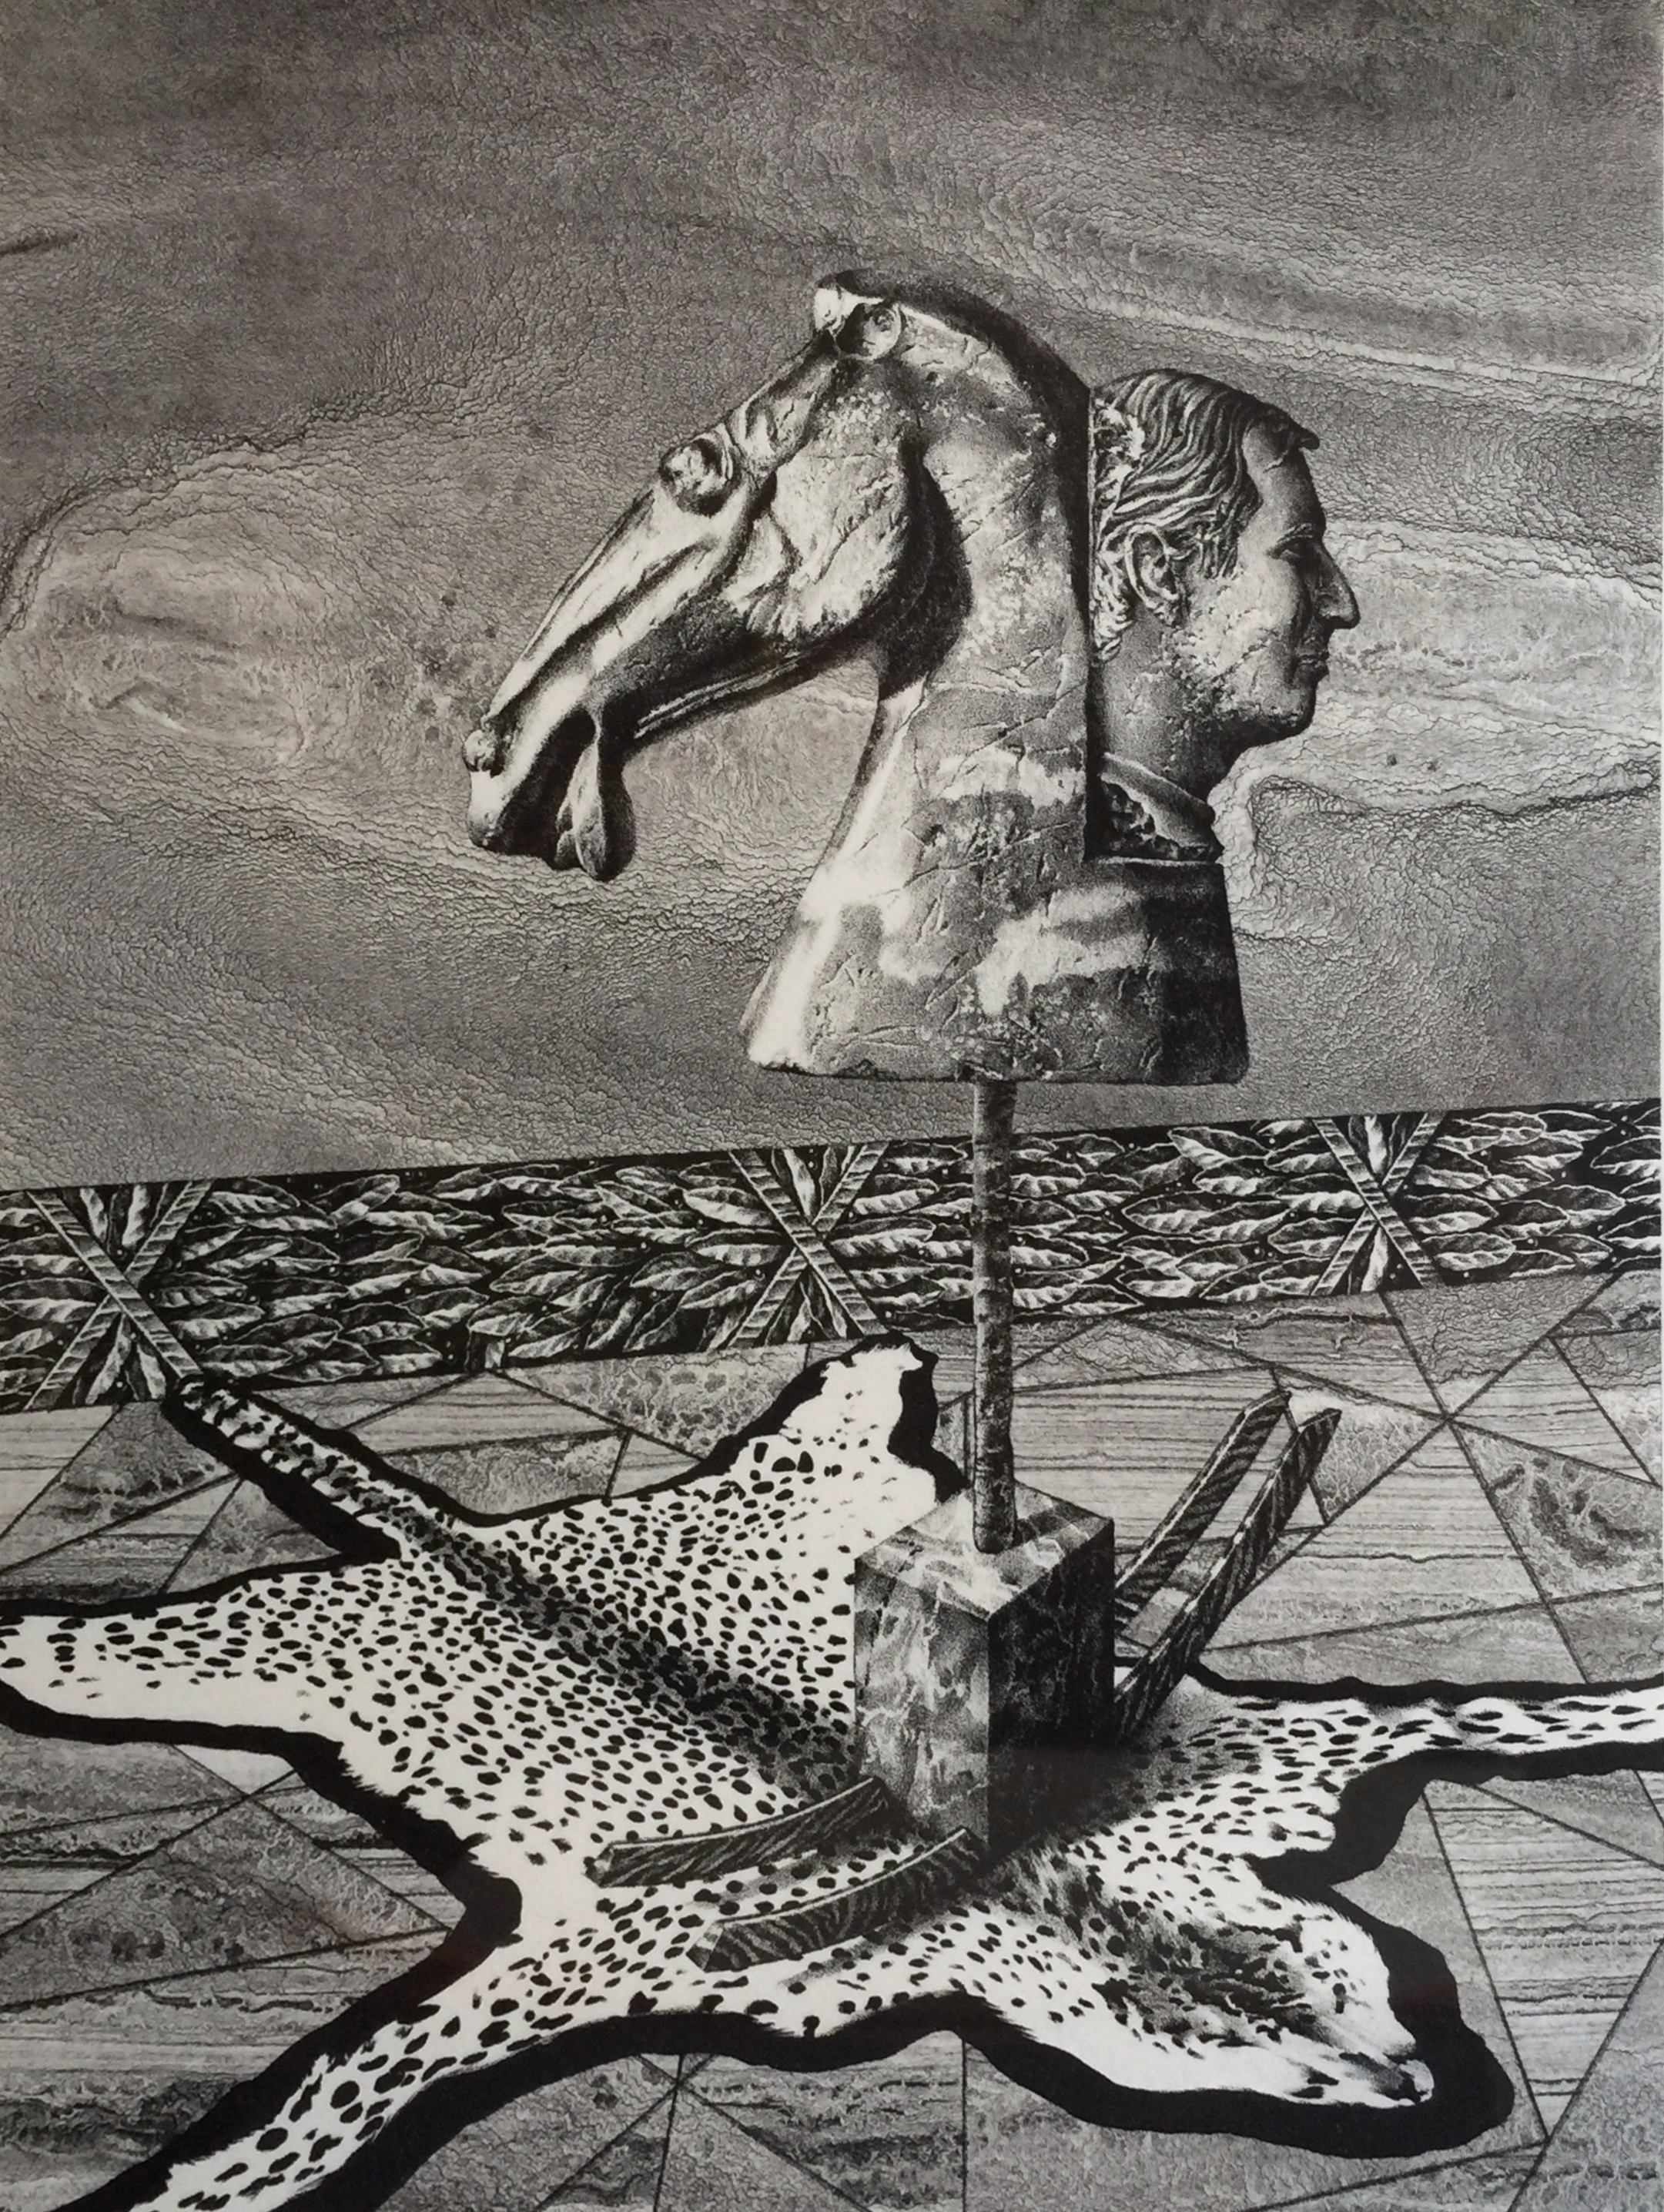 Image of a horse head and a man's head standing on a cat's skin.